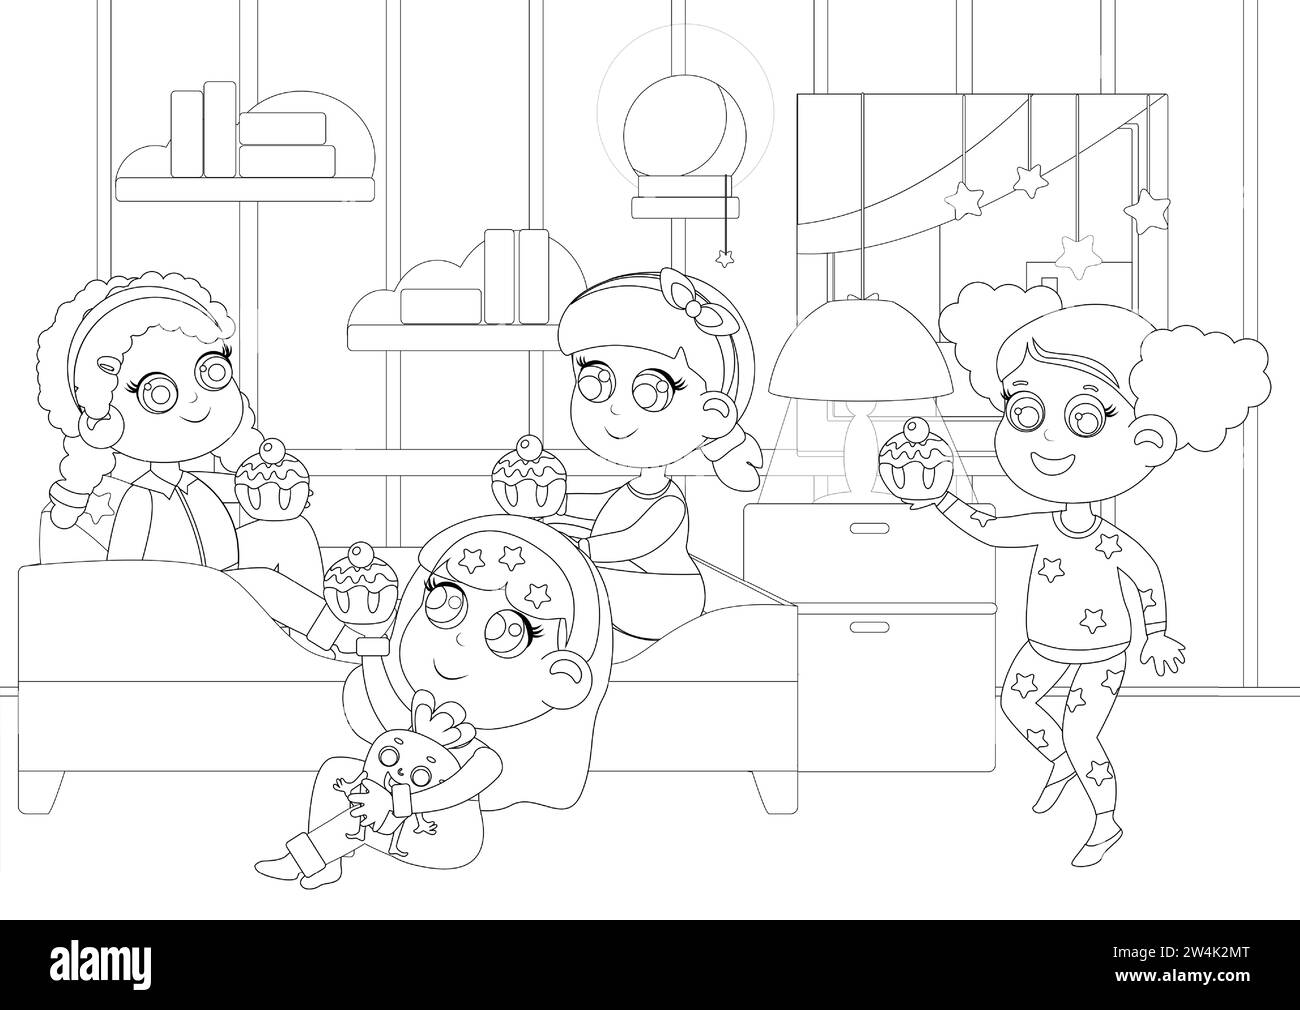 Coloring page. The children had a pajama party. The girls are dressed in pajamas and are in the bedroom. Children's room in a cartoon style. The bedro Stock Vector